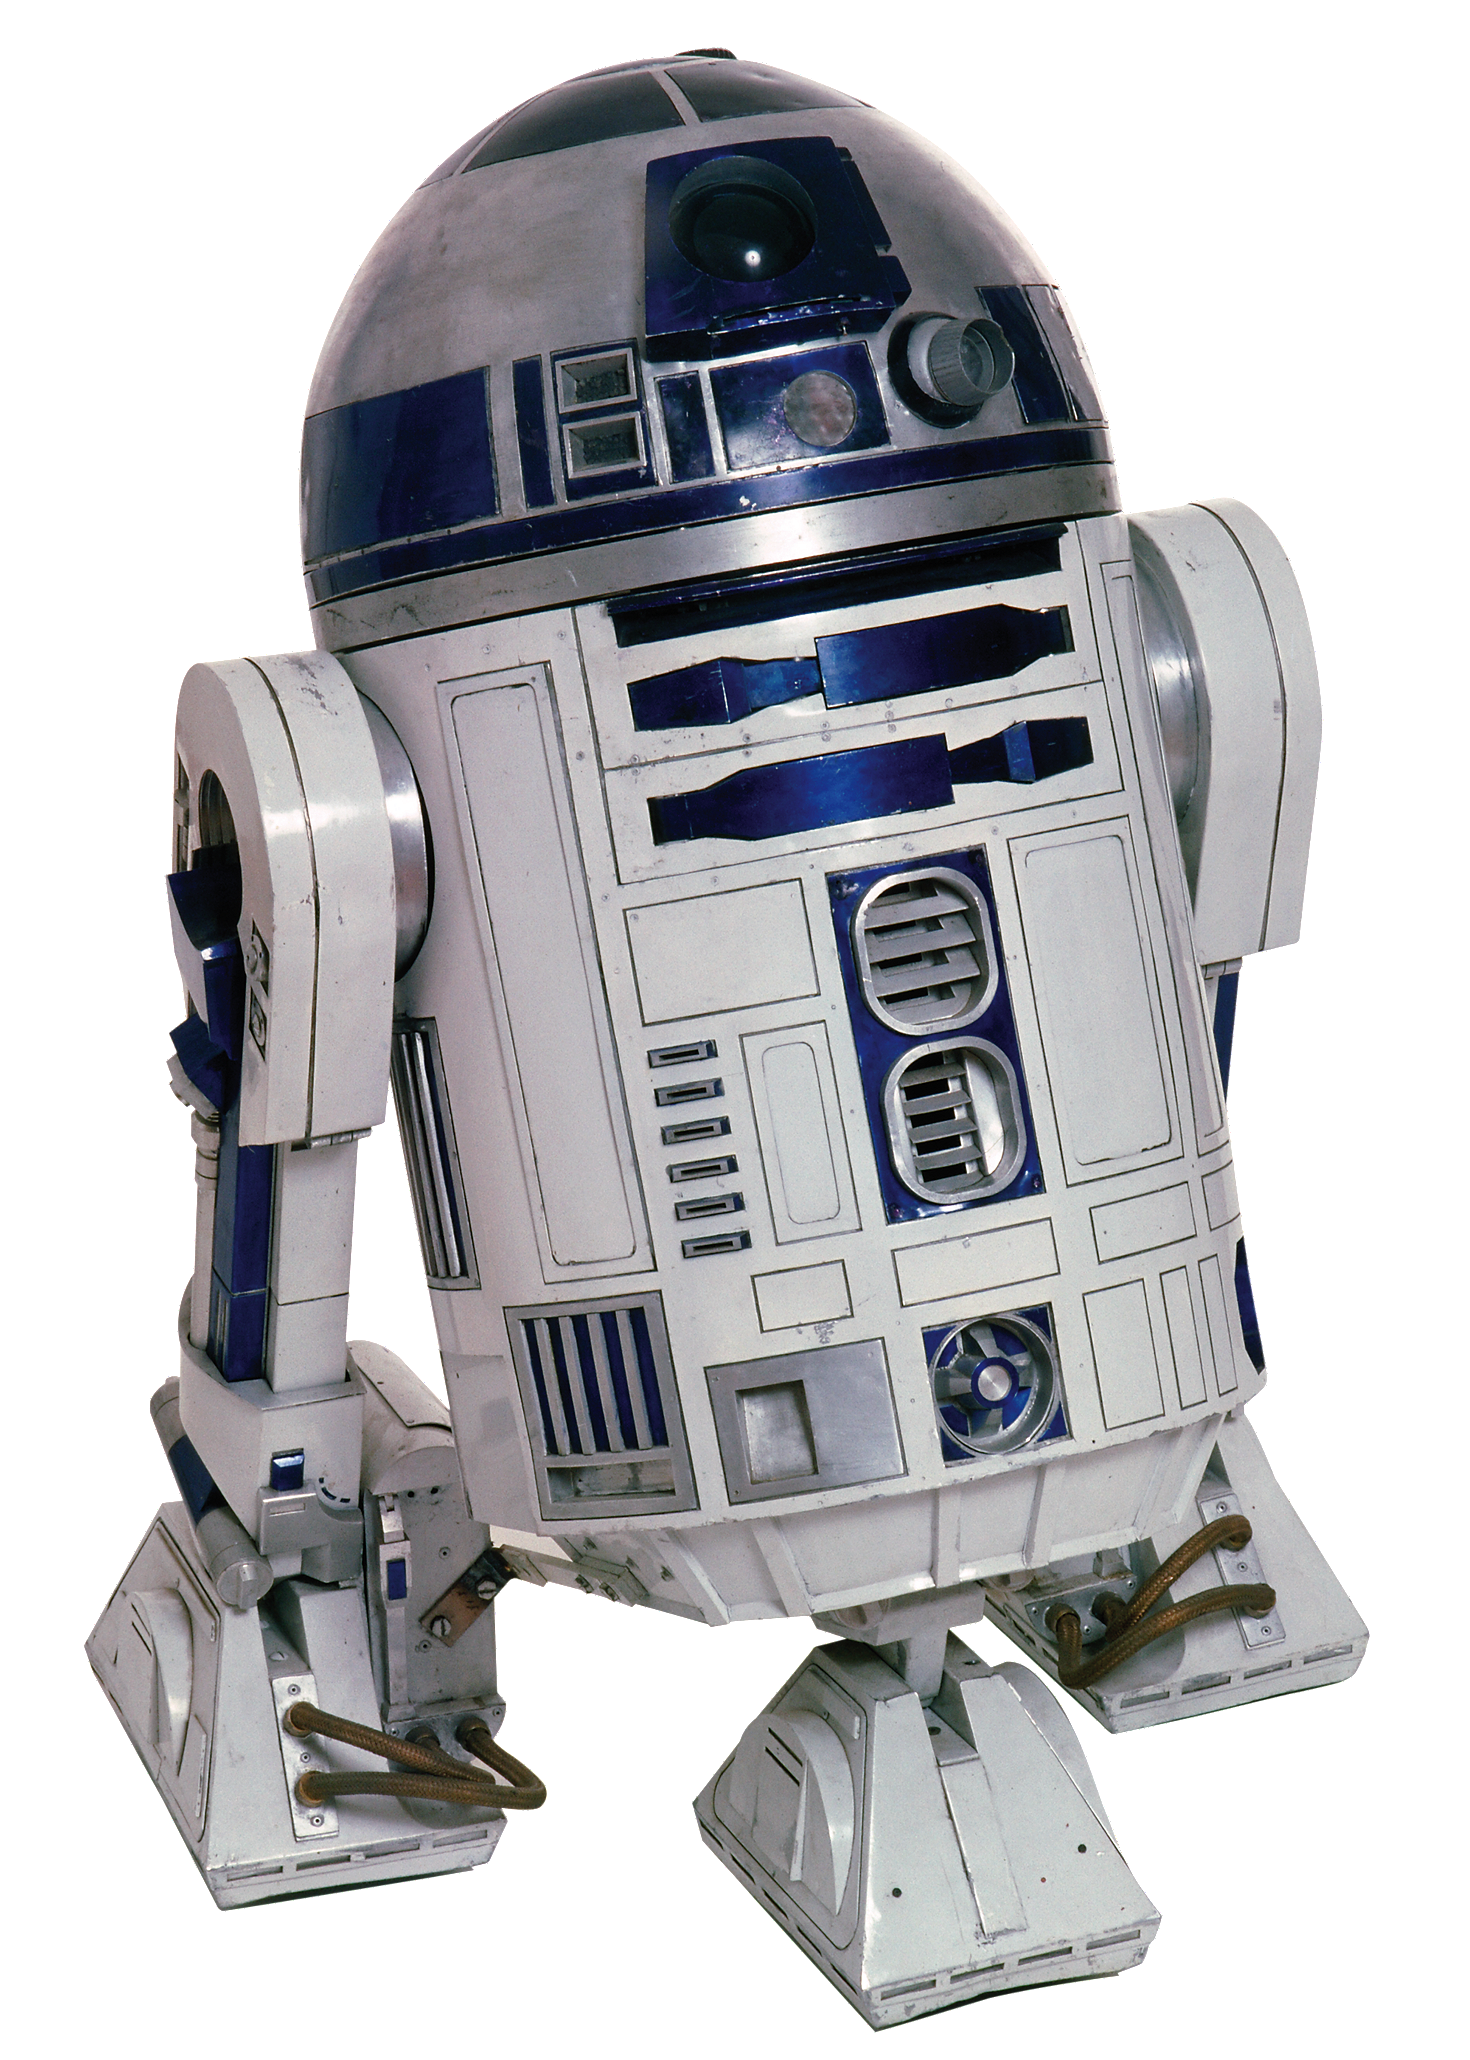 Bandai Tamashii Nations Cho-go-kin Die Cast Perfect Model R2-D2 | Page 3 |  Rebelscum.com Forums